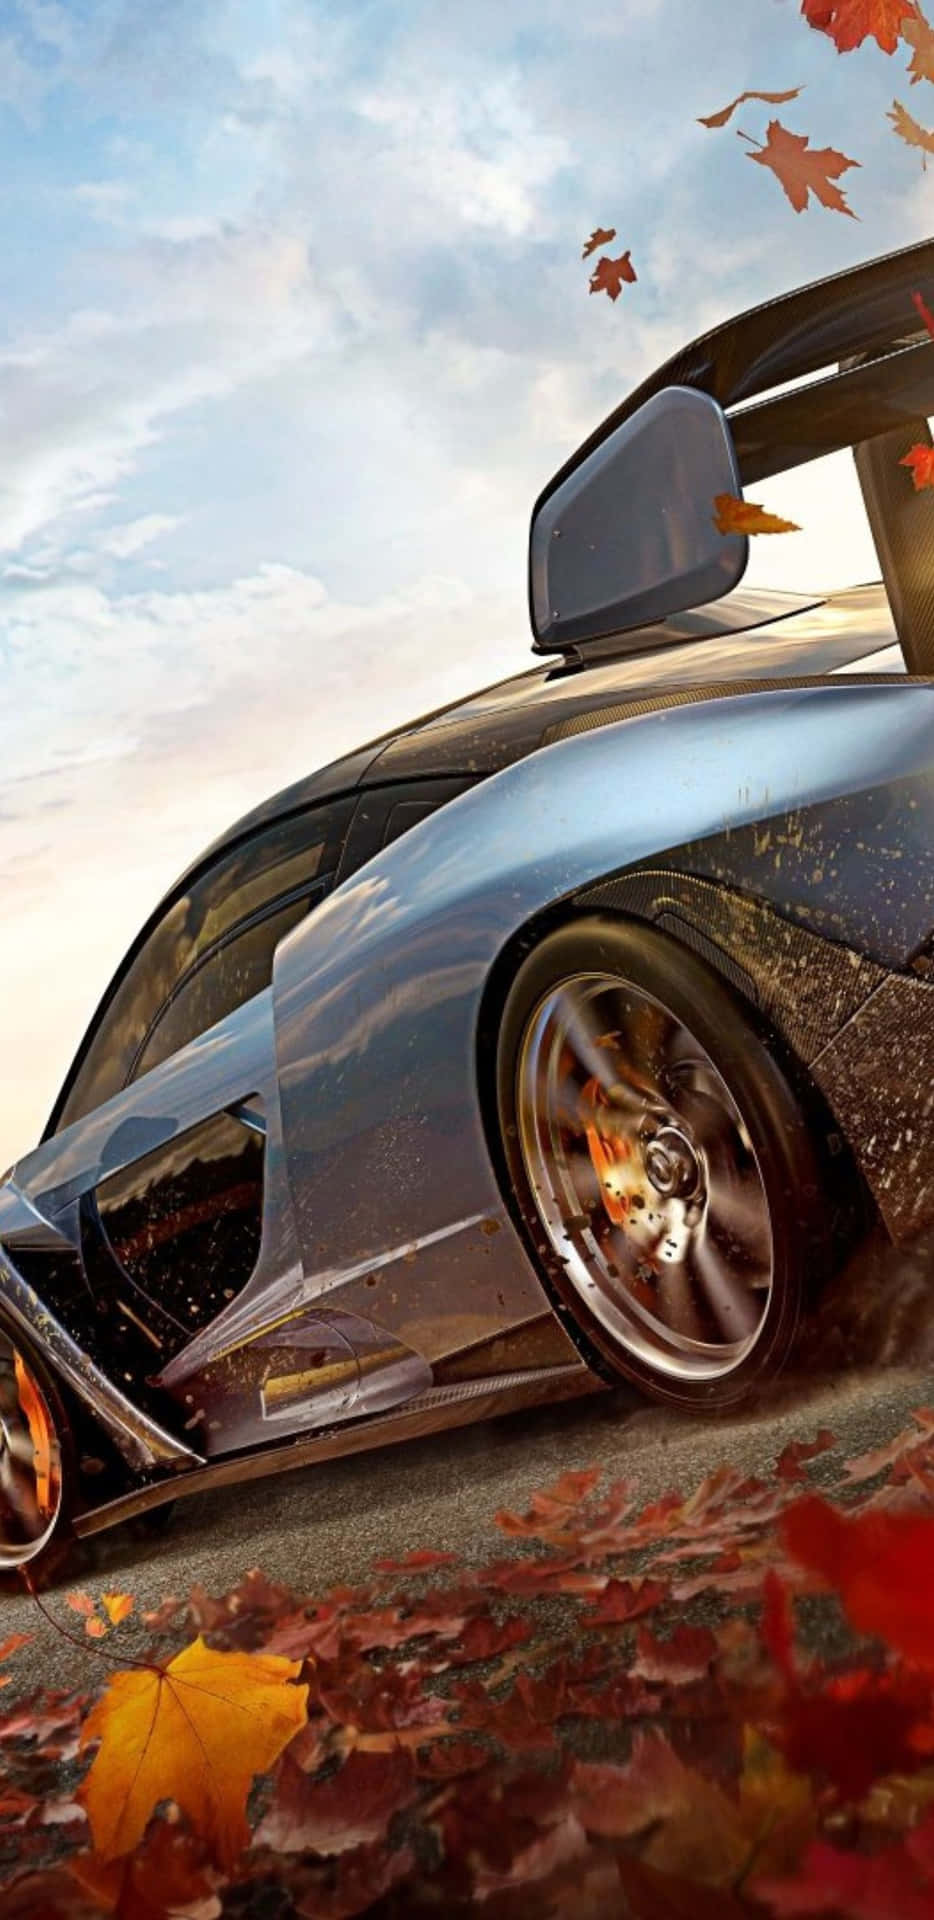 Take your gaming to the next level with Pixel 3xl and Forza Horizon 4